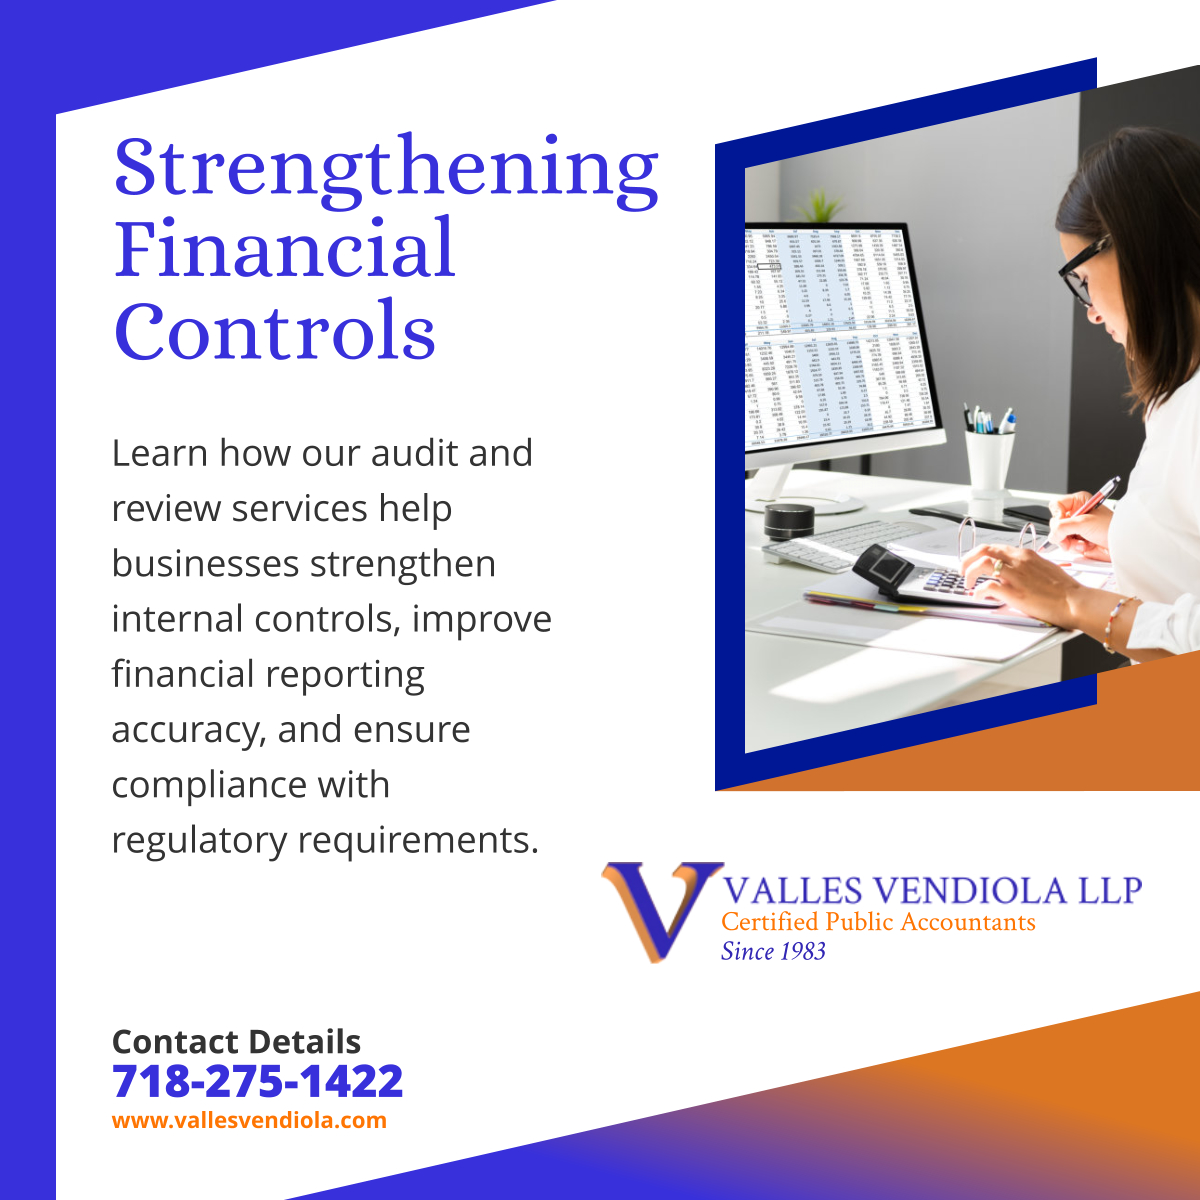 Strengthen your business's financial controls with our audit and review services. Let us help you enhance transparency and accountability in your financial operations. 

Read more: facebook.com/photo/?fbid=12…
 
#ManhattanNY #AccountingFirm #FinancialControls